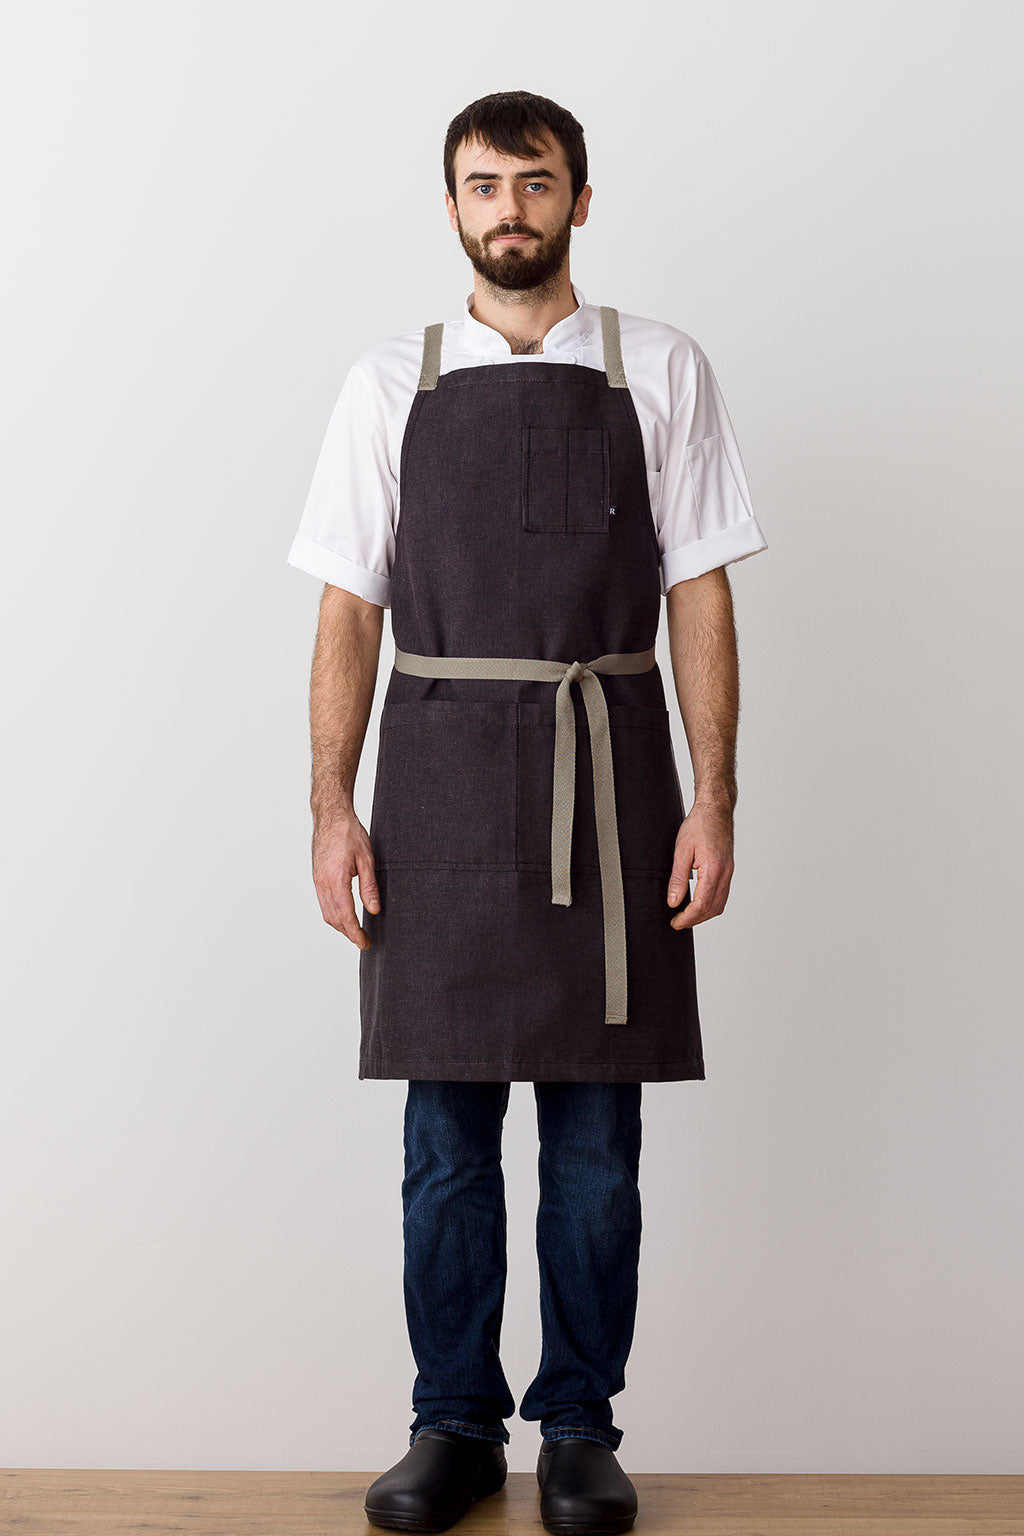 Cross Back Apron Comfortable Charcoal Black Tan Straps Durable Restaurant Quality Reluctant Threads